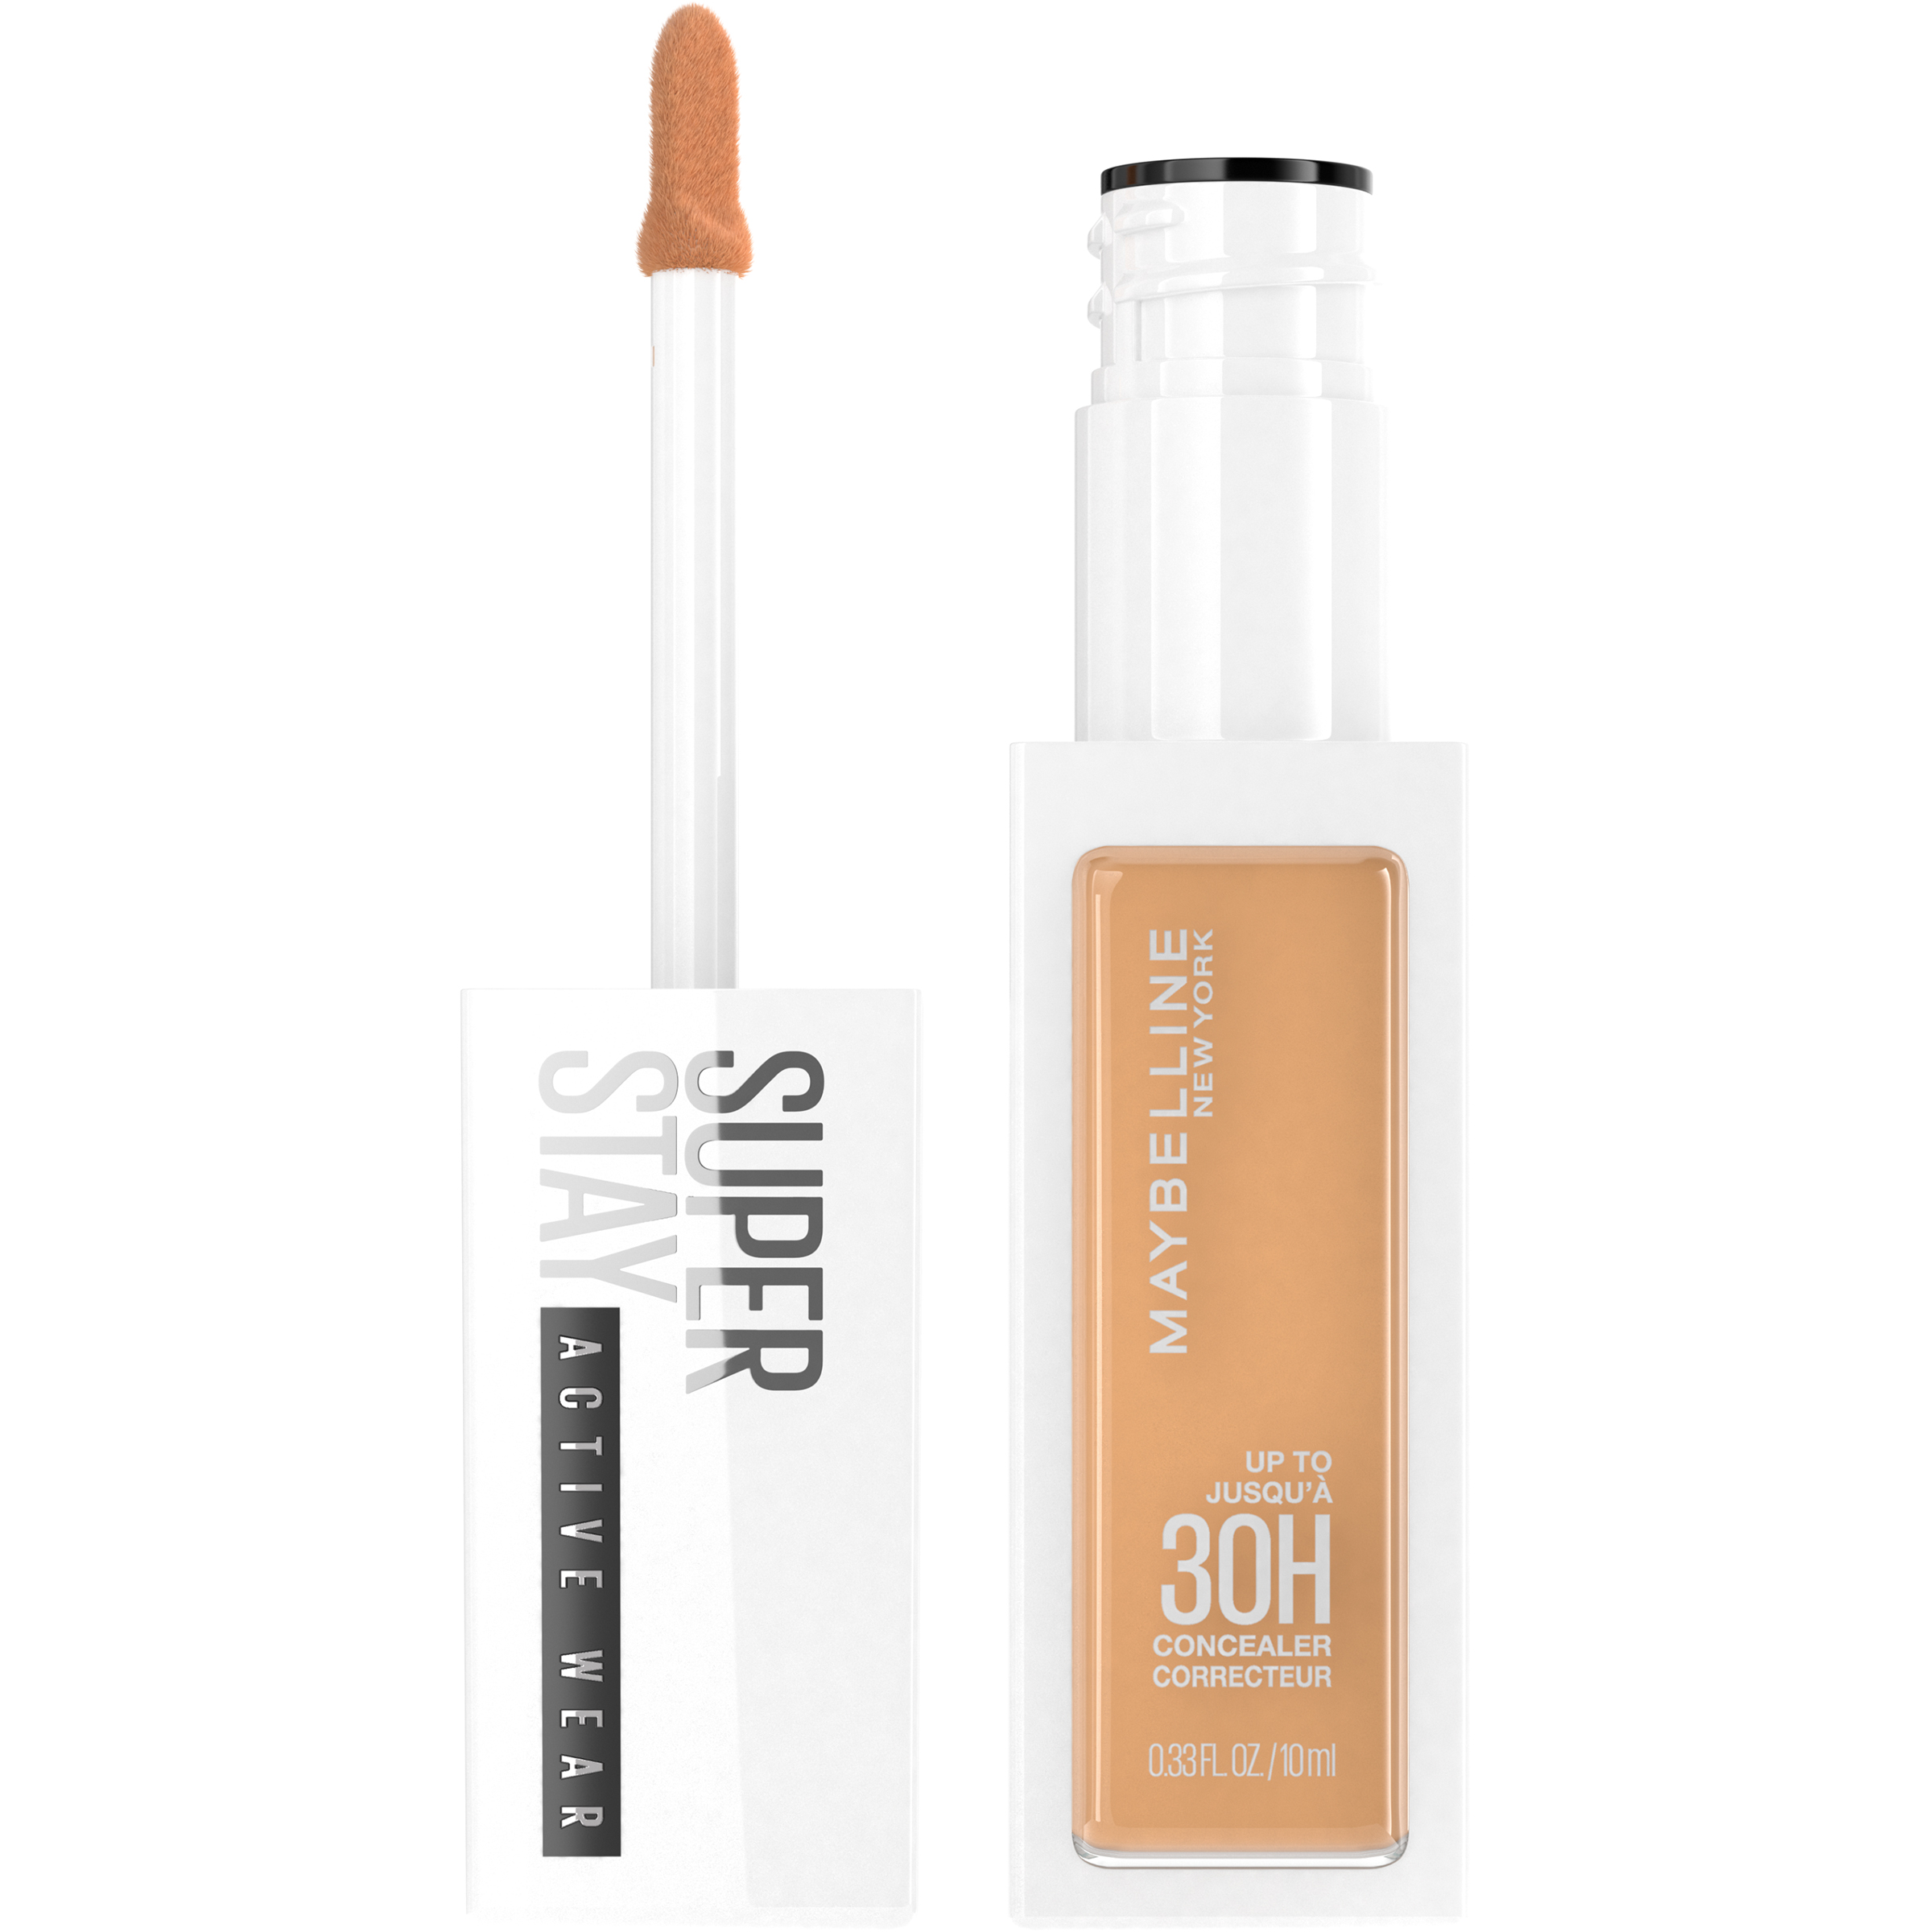 Photos - Other Cosmetics Maybelline Super Stay Longwear Liquid Concealer 